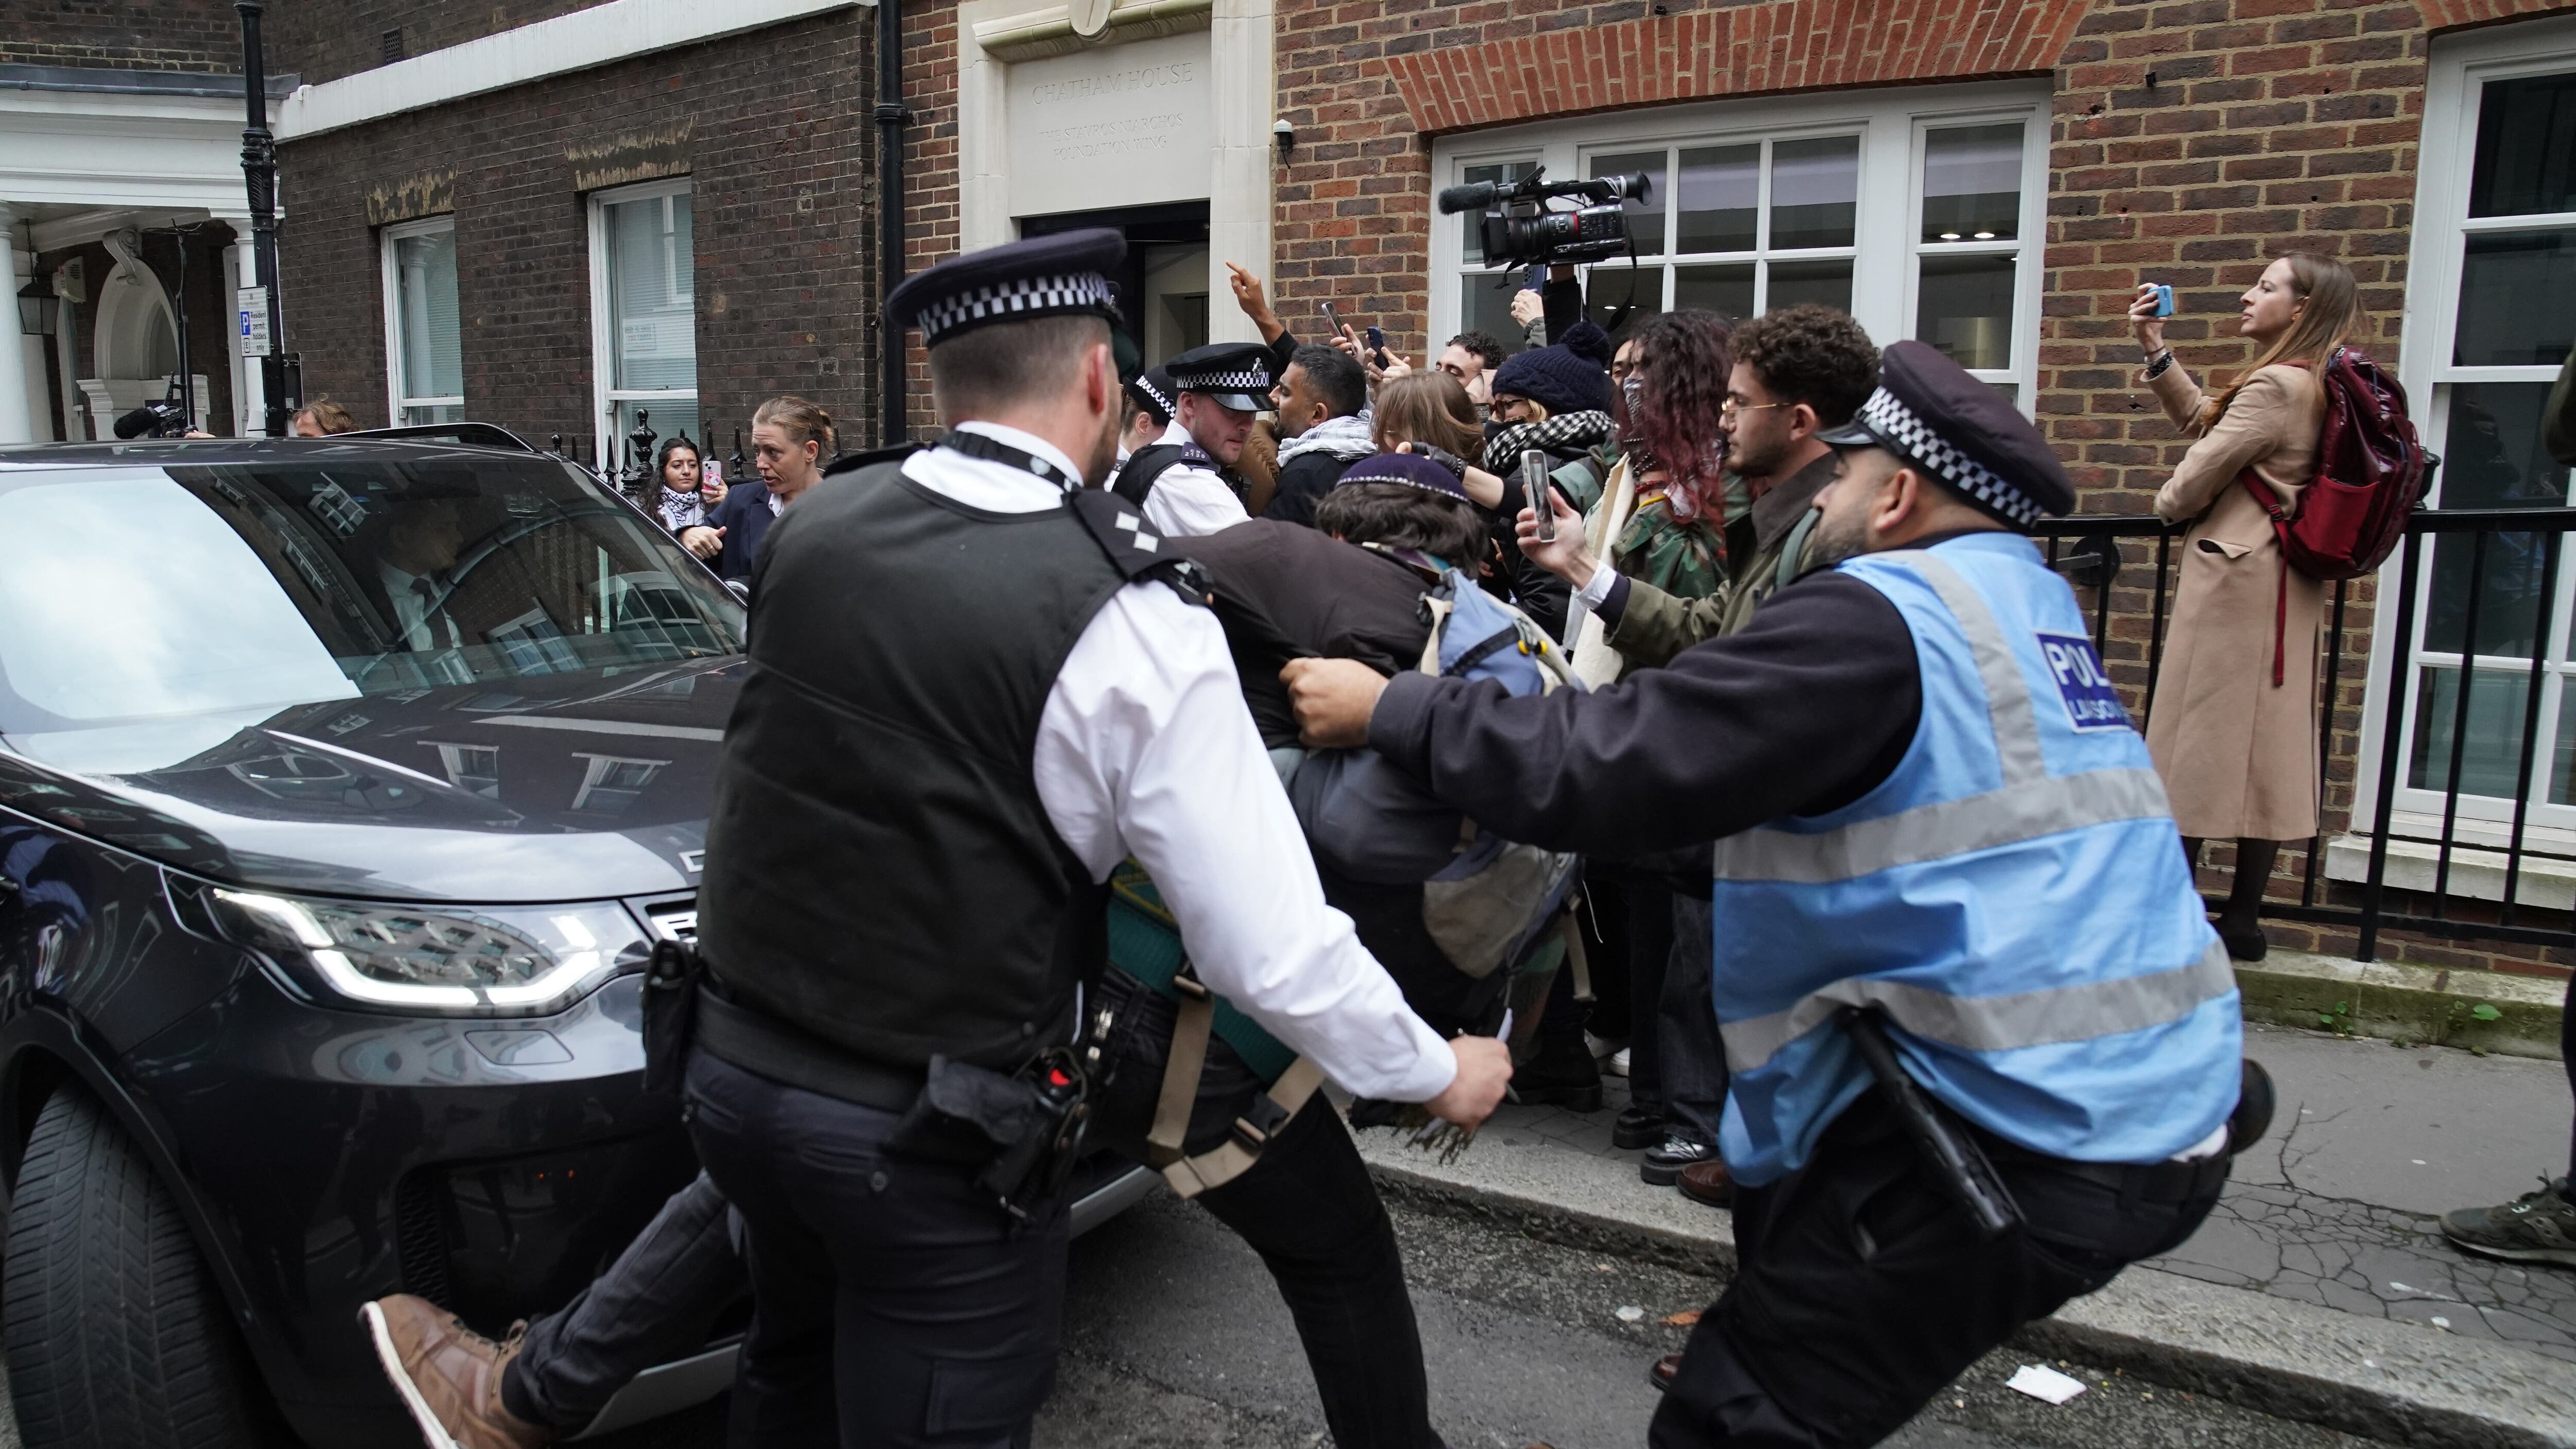 Police officers move a man trying to block Labour leader Sir Keir Starmer’s car as he leaves, following his speech on the situation in the Middle East at Chatham House in central London (Stefan Rousseau/PA)